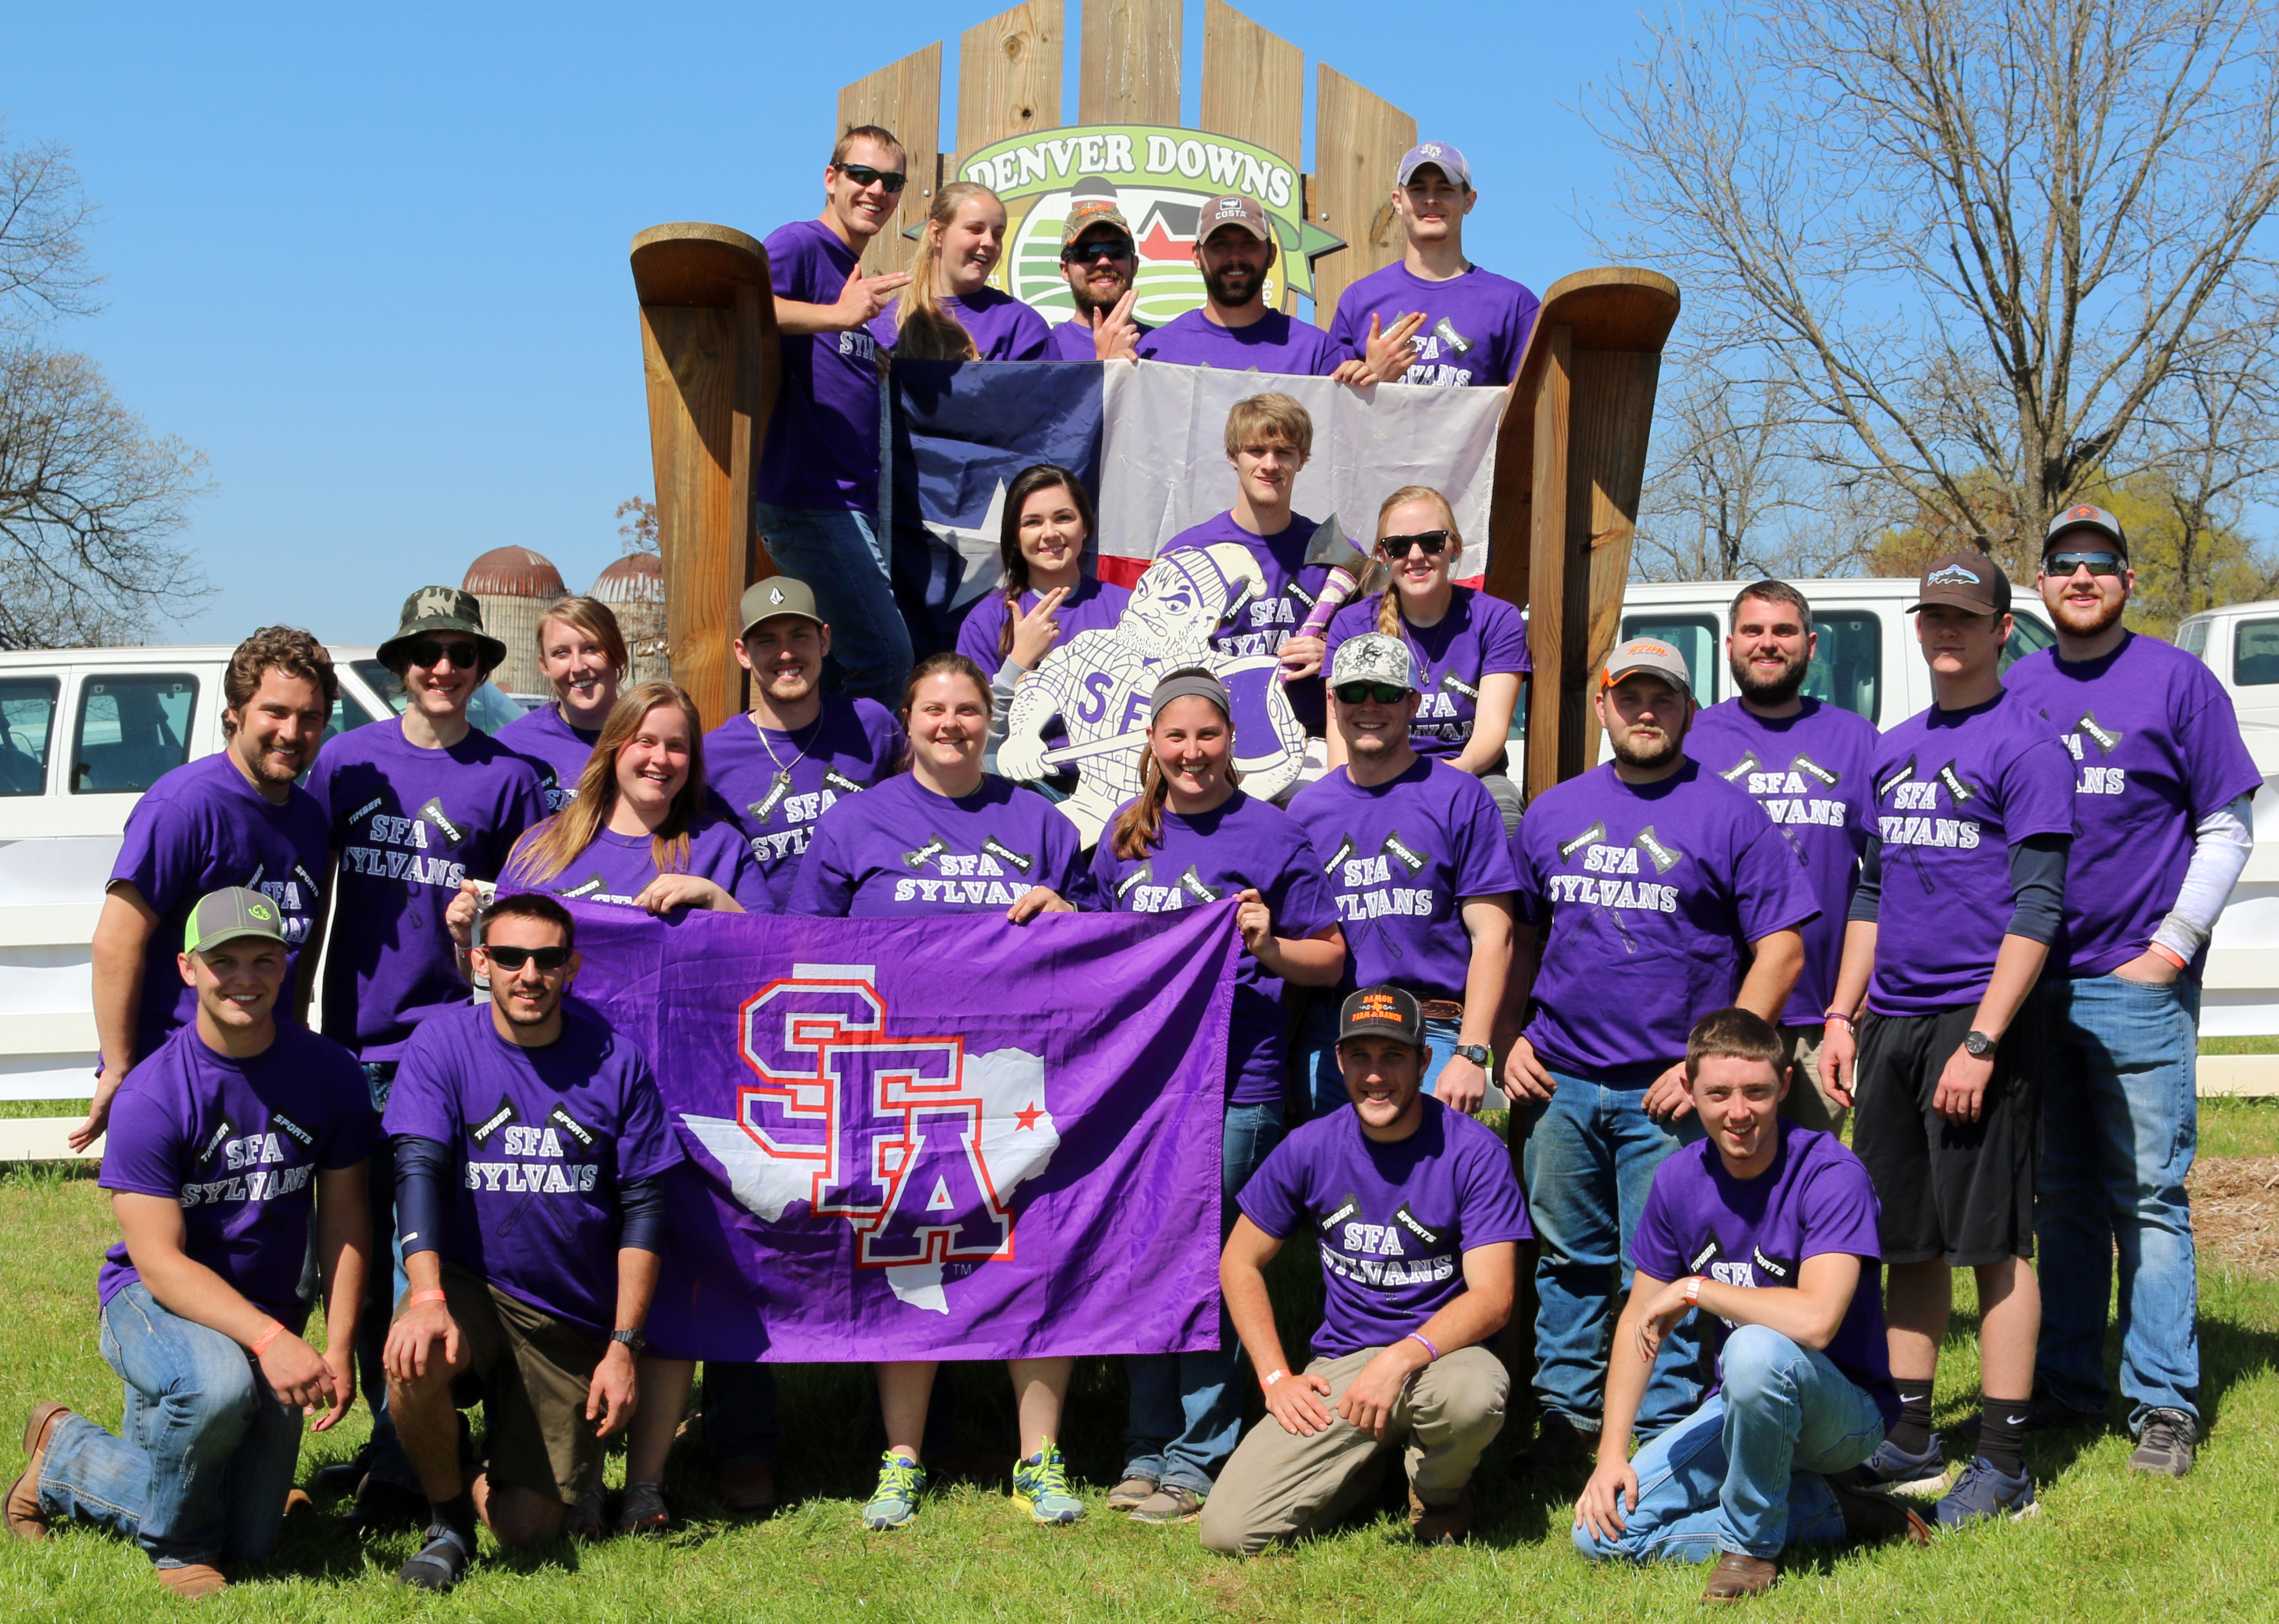 Image of Chelsea Lopez, center, holding the SFA flag, with the 2016 timbersports team she coached.